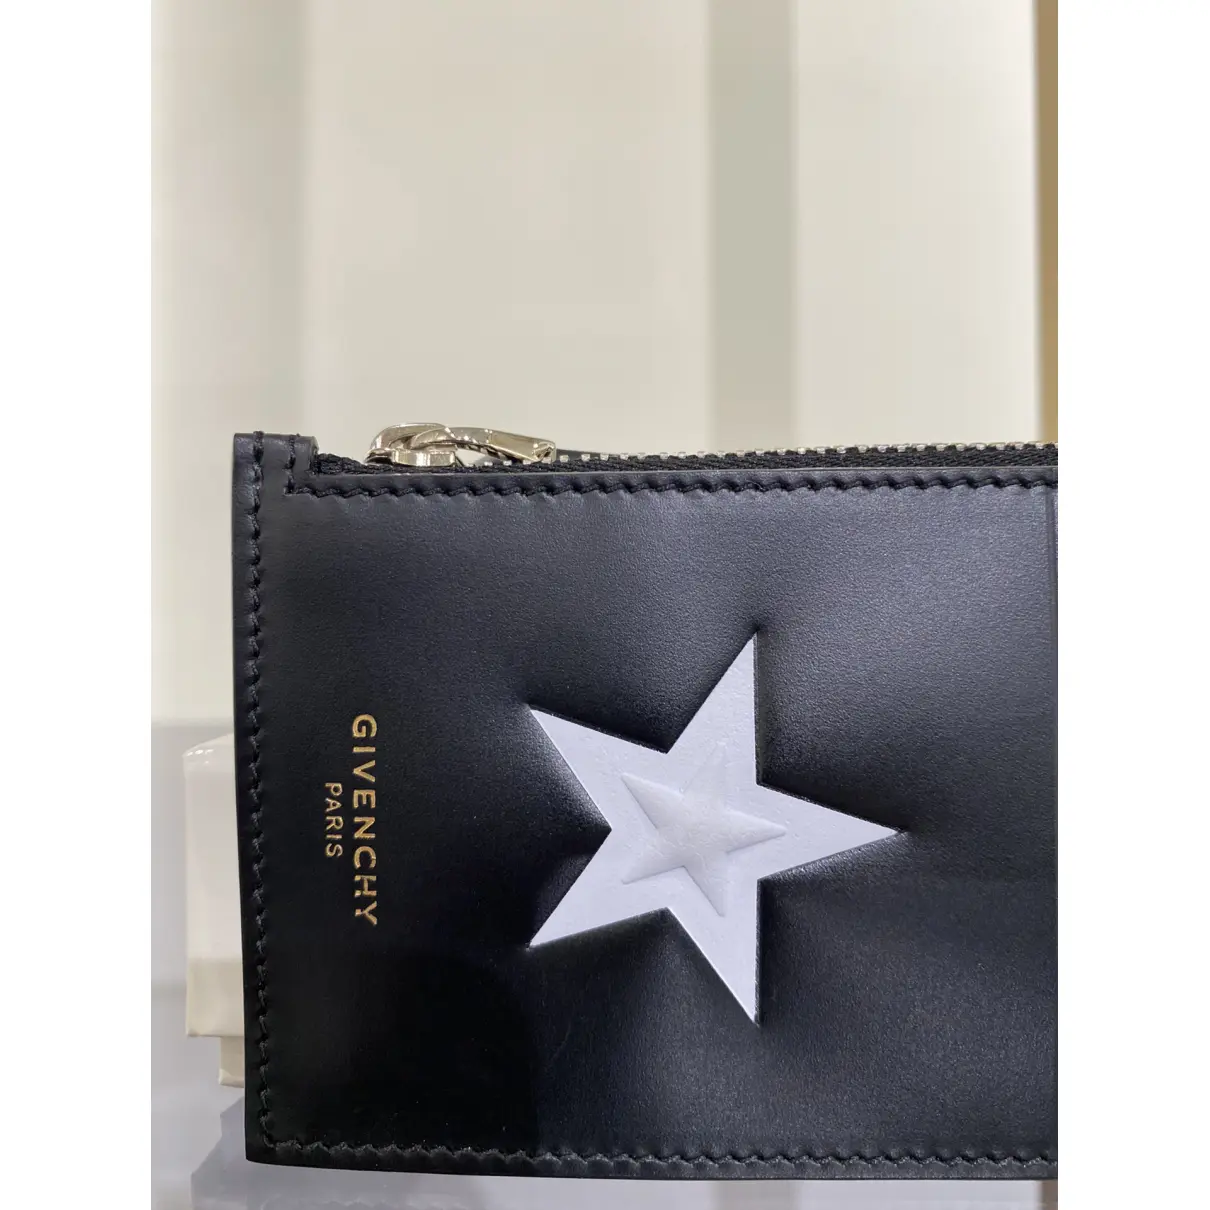 Buy Givenchy Leather small bag online